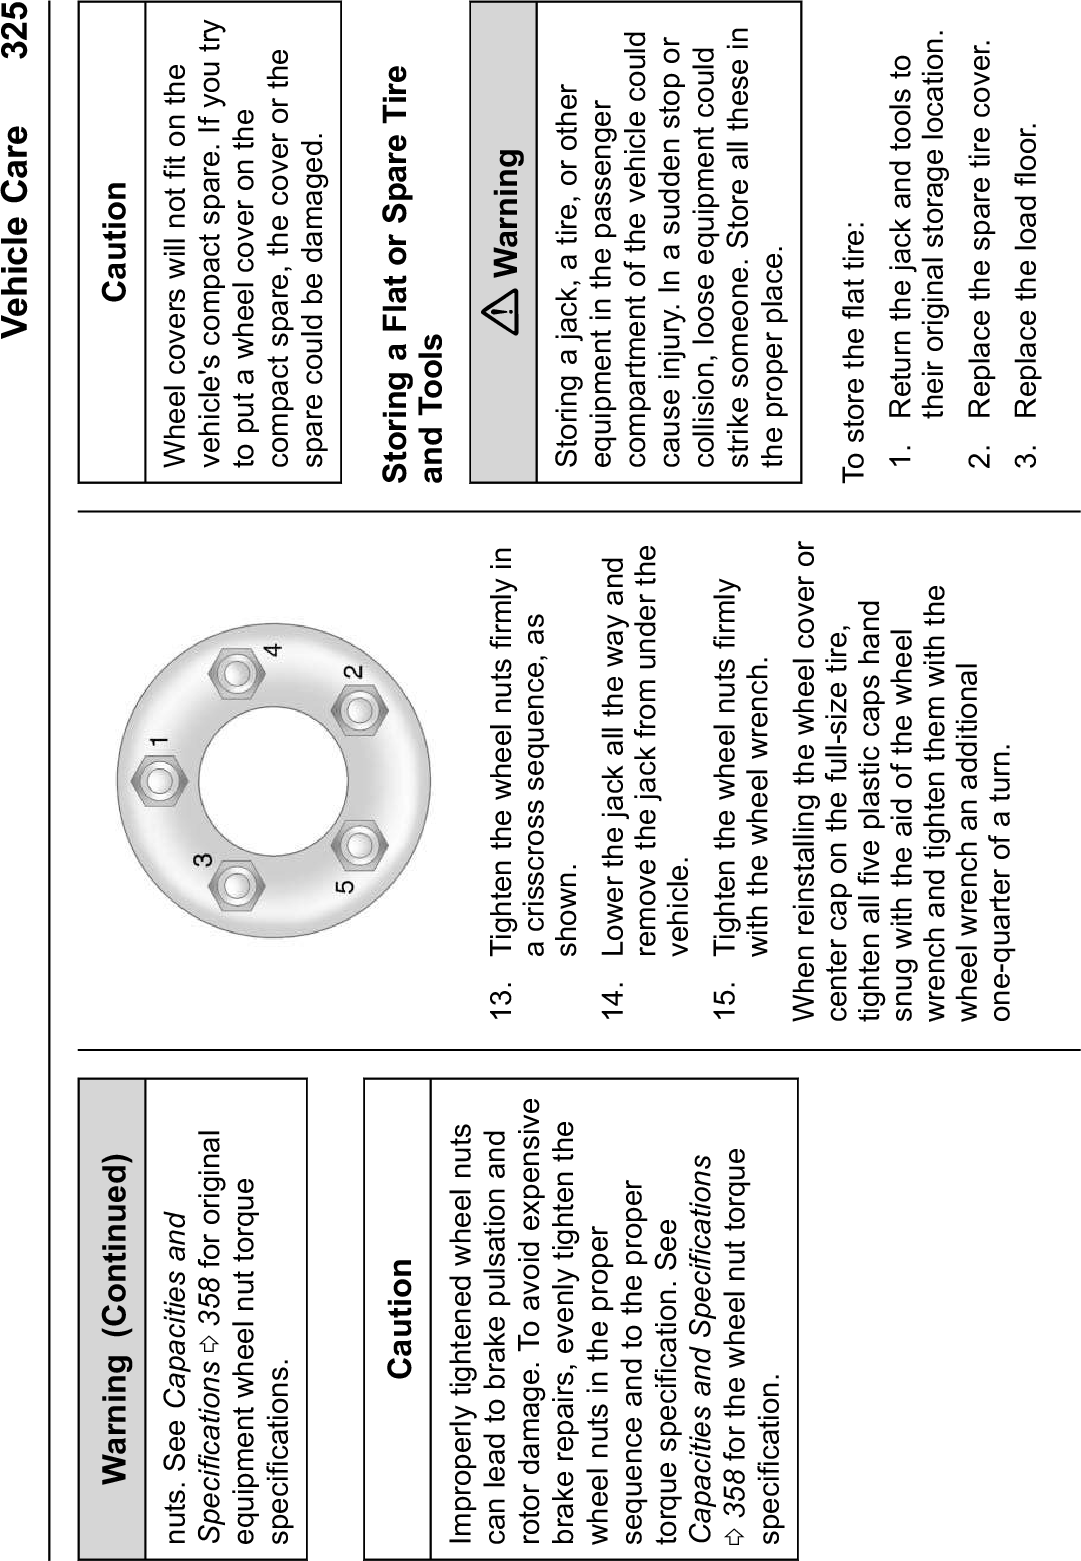 Vehicle Care 325Warning (Continued)nuts. See Capacities andSpecifications 0358 for originalequipment wheel nut torquespecifications.CautionImproperly tightened wheel nutscan lead to brake pulsation androtor damage. To avoid expensivebrake repairs, evenly tighten thewheel nuts in the propersequence and to the propertorque specification. SeeCapacities and Specifications0358 for the wheel nut torquespecification.13. Tighten the wheel nuts firmly ina crisscross sequence, asshown.14. Lower the jack all the way andremove the jack from under thevehicle.15. Tighten the wheel nuts firmlywith the wheel wrench.When reinstalling the wheel cover orcenter cap on the full-size tire,tighten all five plastic caps handsnug with the aid of the wheelwrench and tighten them with thewheel wrench an additionalone-quarter of a turn.CautionWheel covers will not fit on thevehicle&apos;s compact spare. If you tryto put a wheel cover on thecompact spare, the cover or thespare could be damaged.Storing a Flat or Spare Tireand Tools{WarningStoring a jack, a tire, or otherequipment in the passengercompartment of the vehicle couldcause injury. In a sudden stop orcollision, loose equipment couldstrike someone. Store all these inthe proper place.To store the flat tire:1. Return the jack and tools totheir original storage location.2. Replace the spare tire cover.3. Replace the load floor.